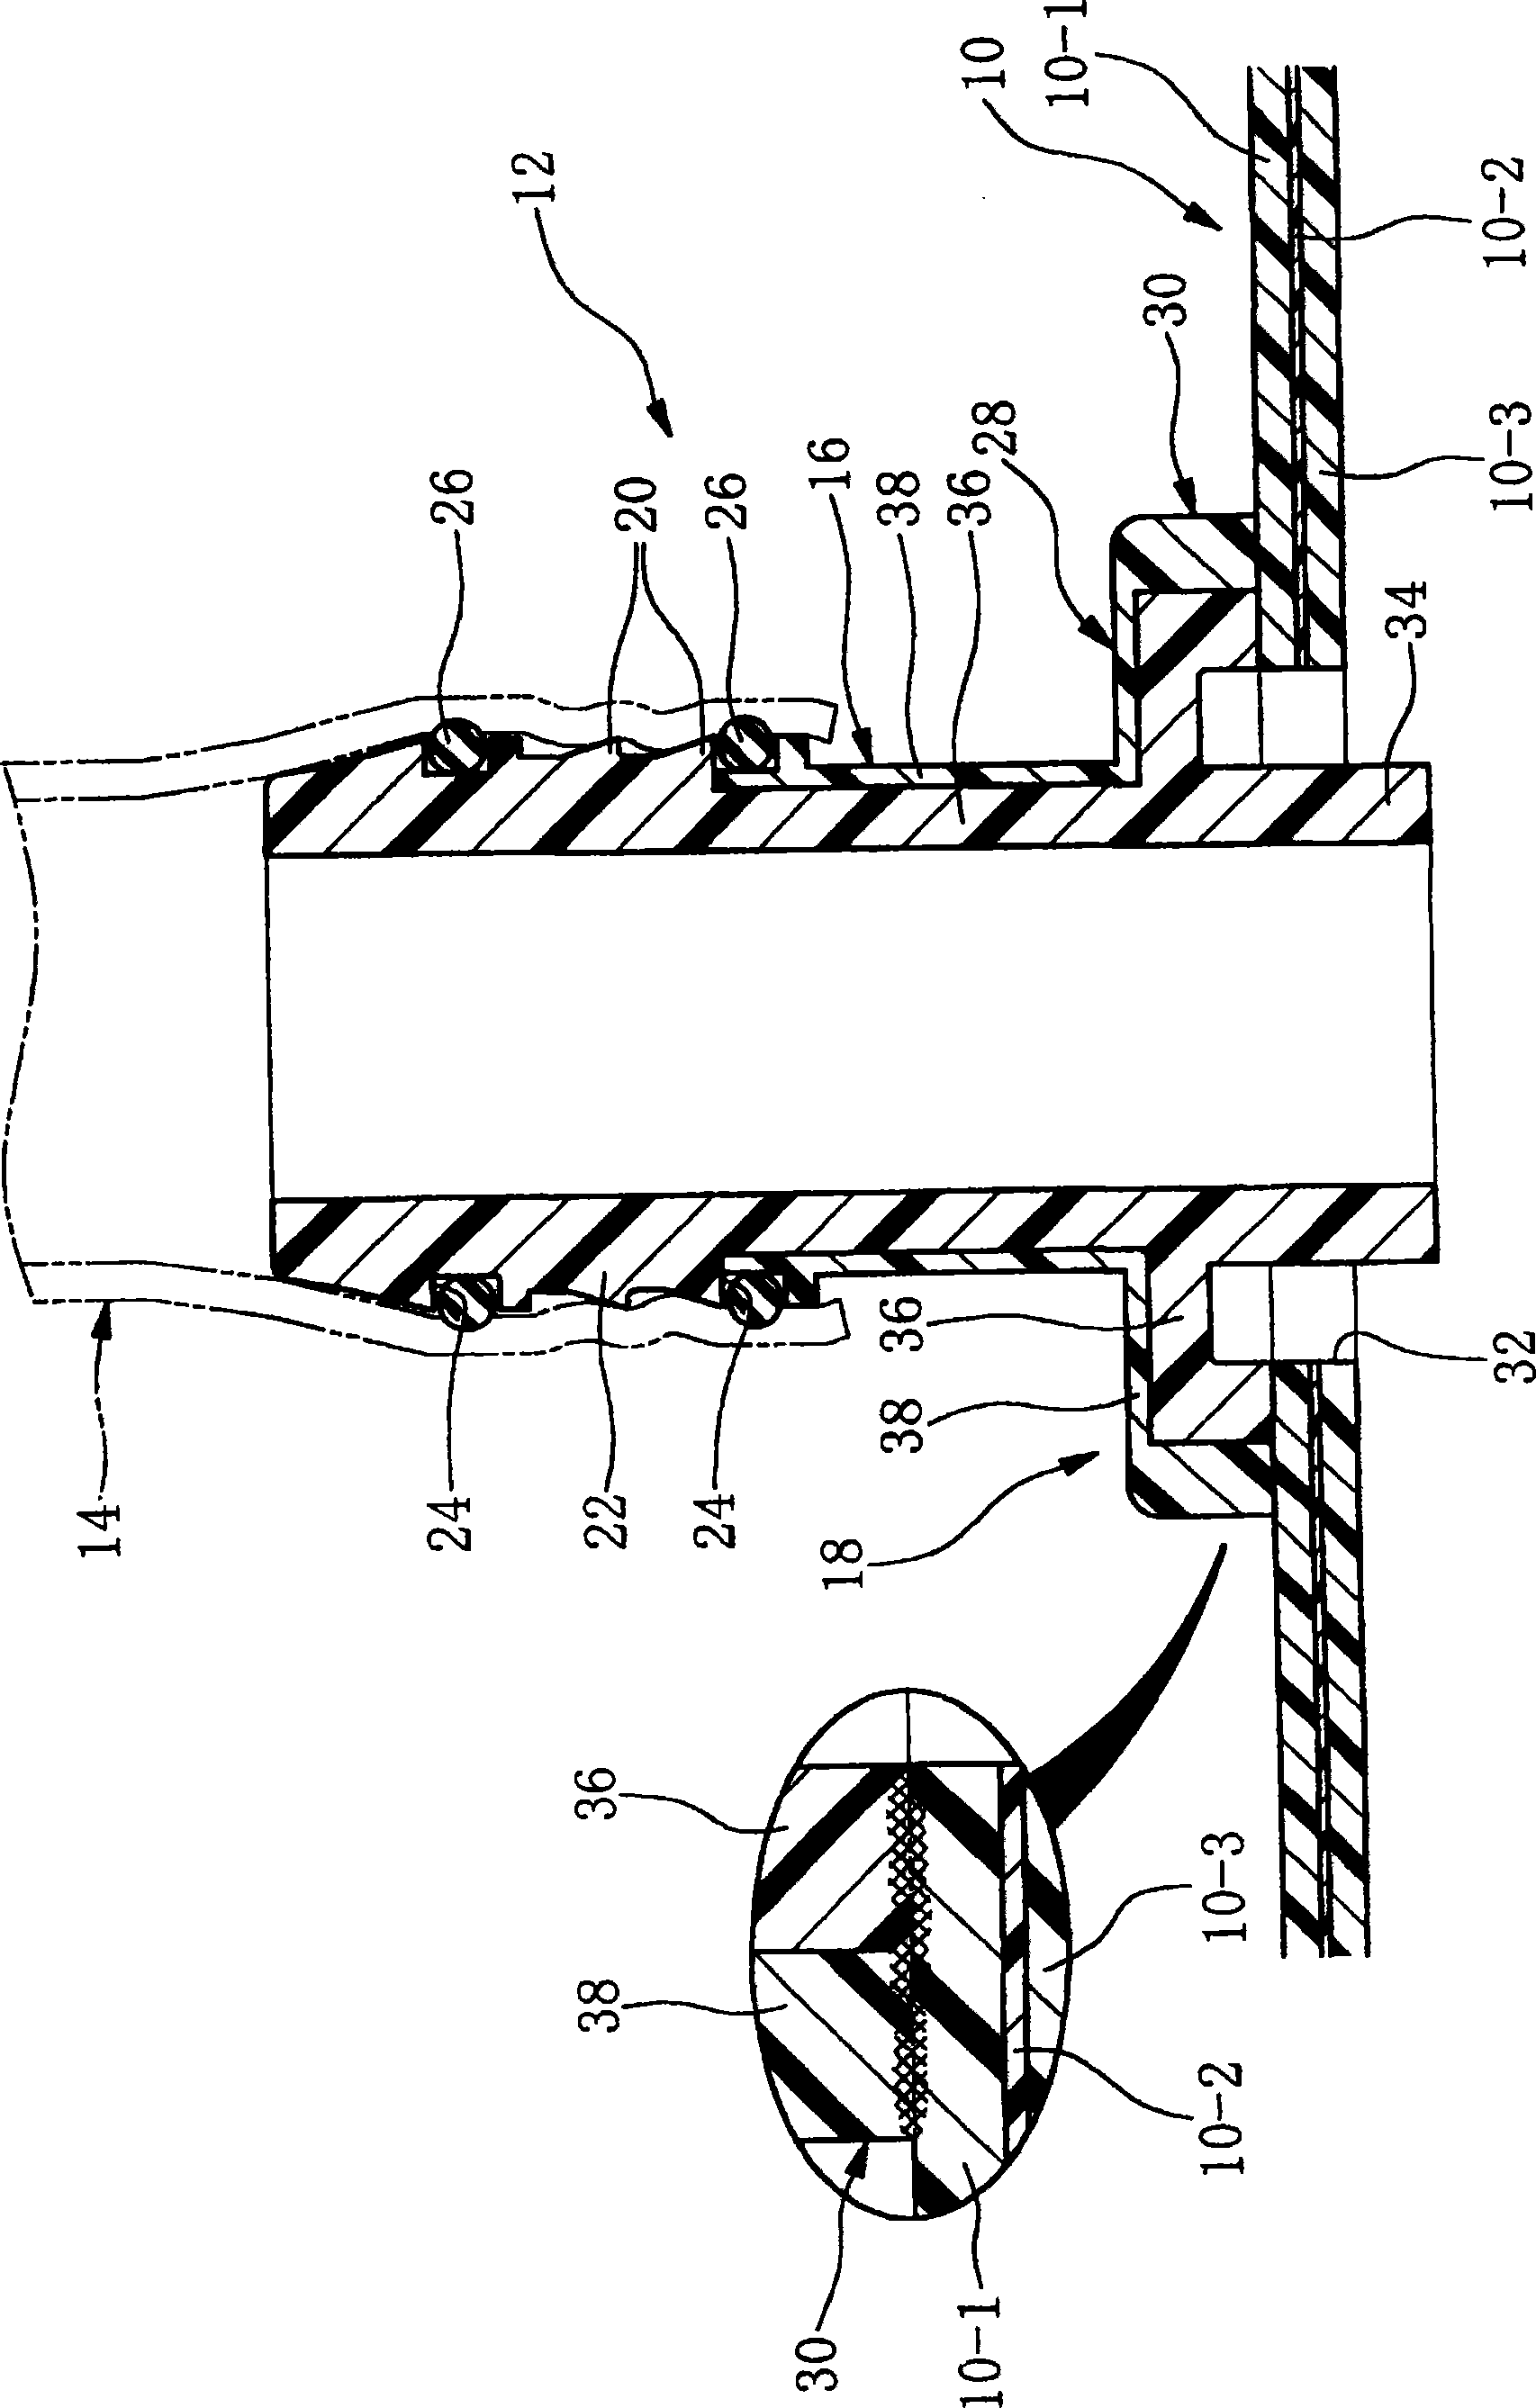 Welding joint for fuel tank